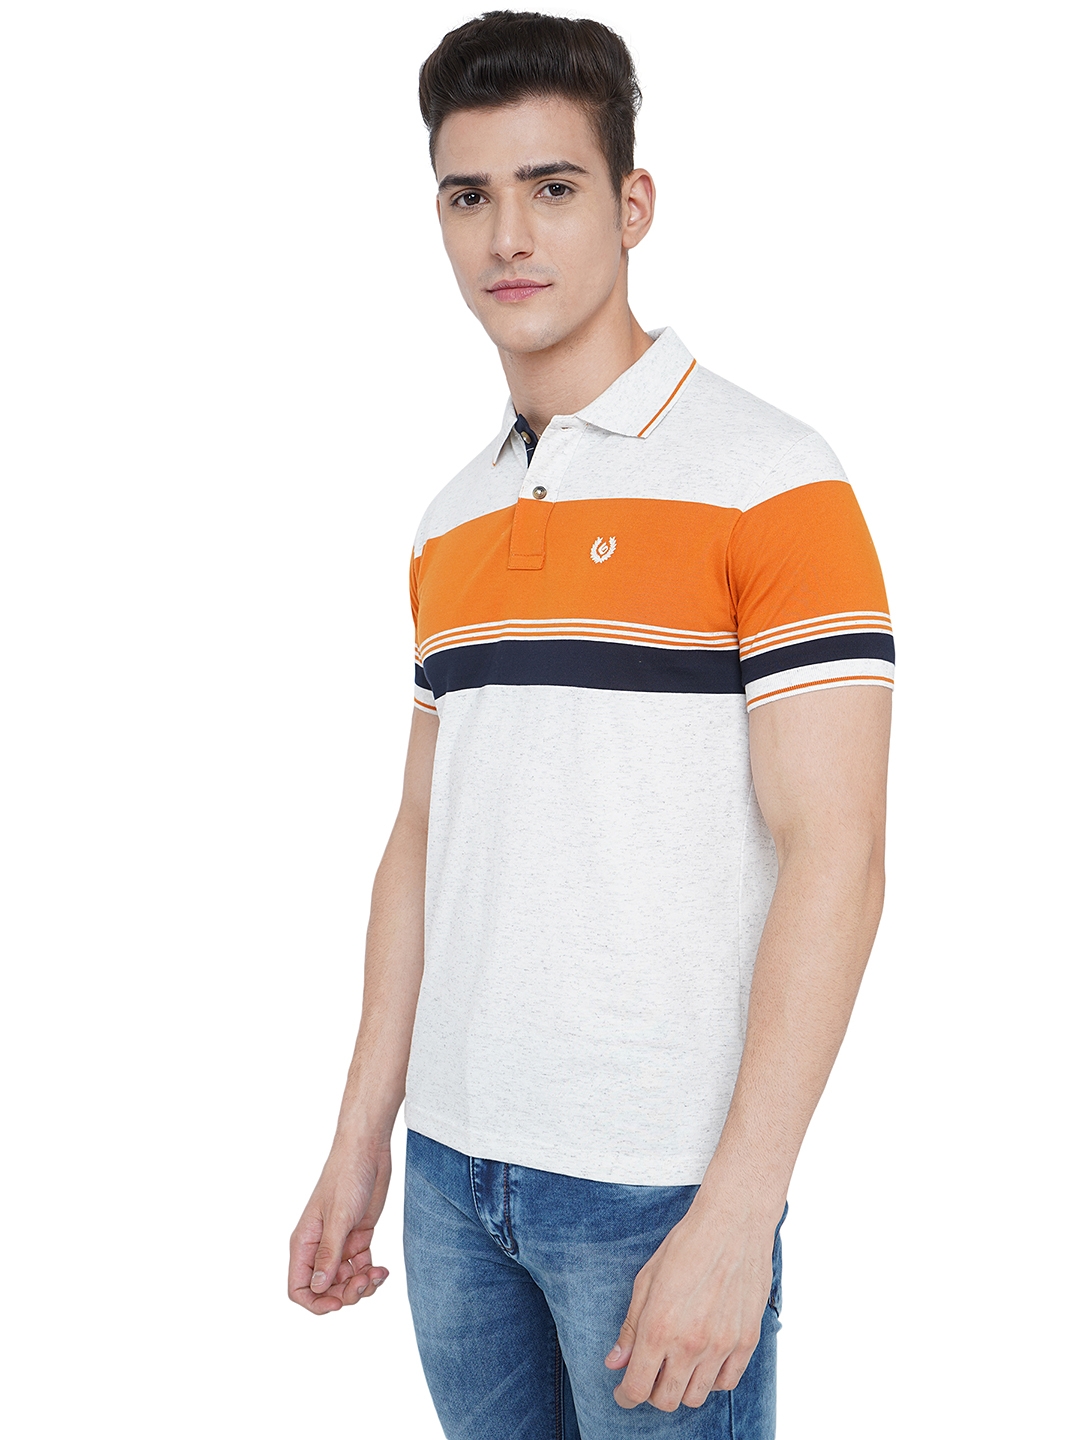 Greenfibre | White Striped Slim Fit Polo T-Shirt | Greenfibre 1